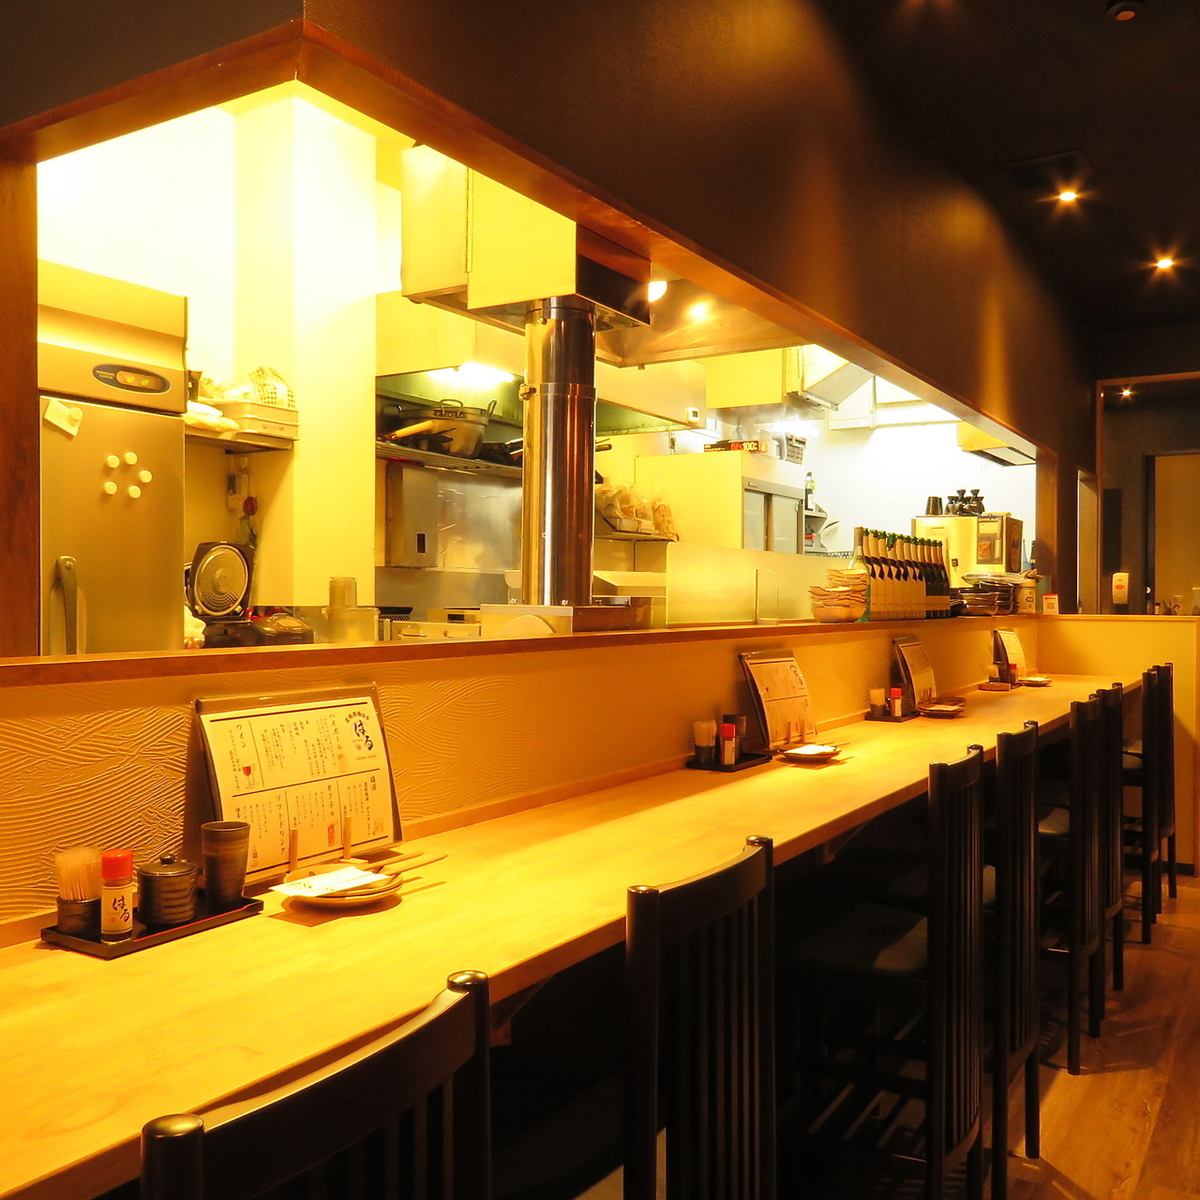 Recommended for dates as you can enjoy popular yakitori and other dishes ◎